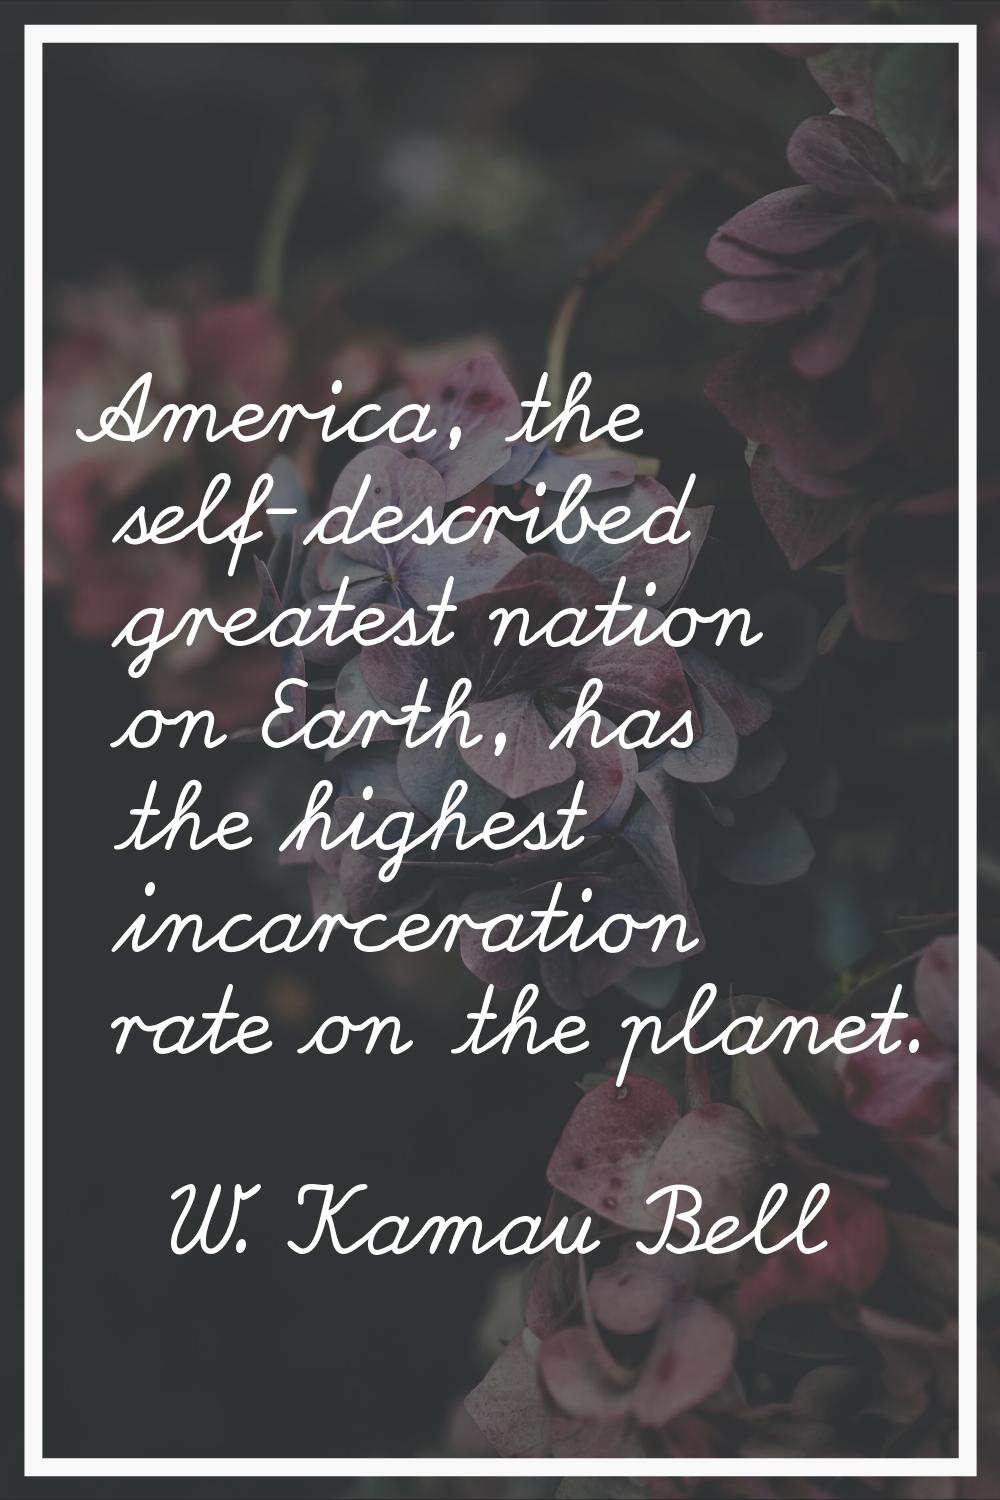 America, the self-described greatest nation on Earth, has the highest incarceration rate on the pla